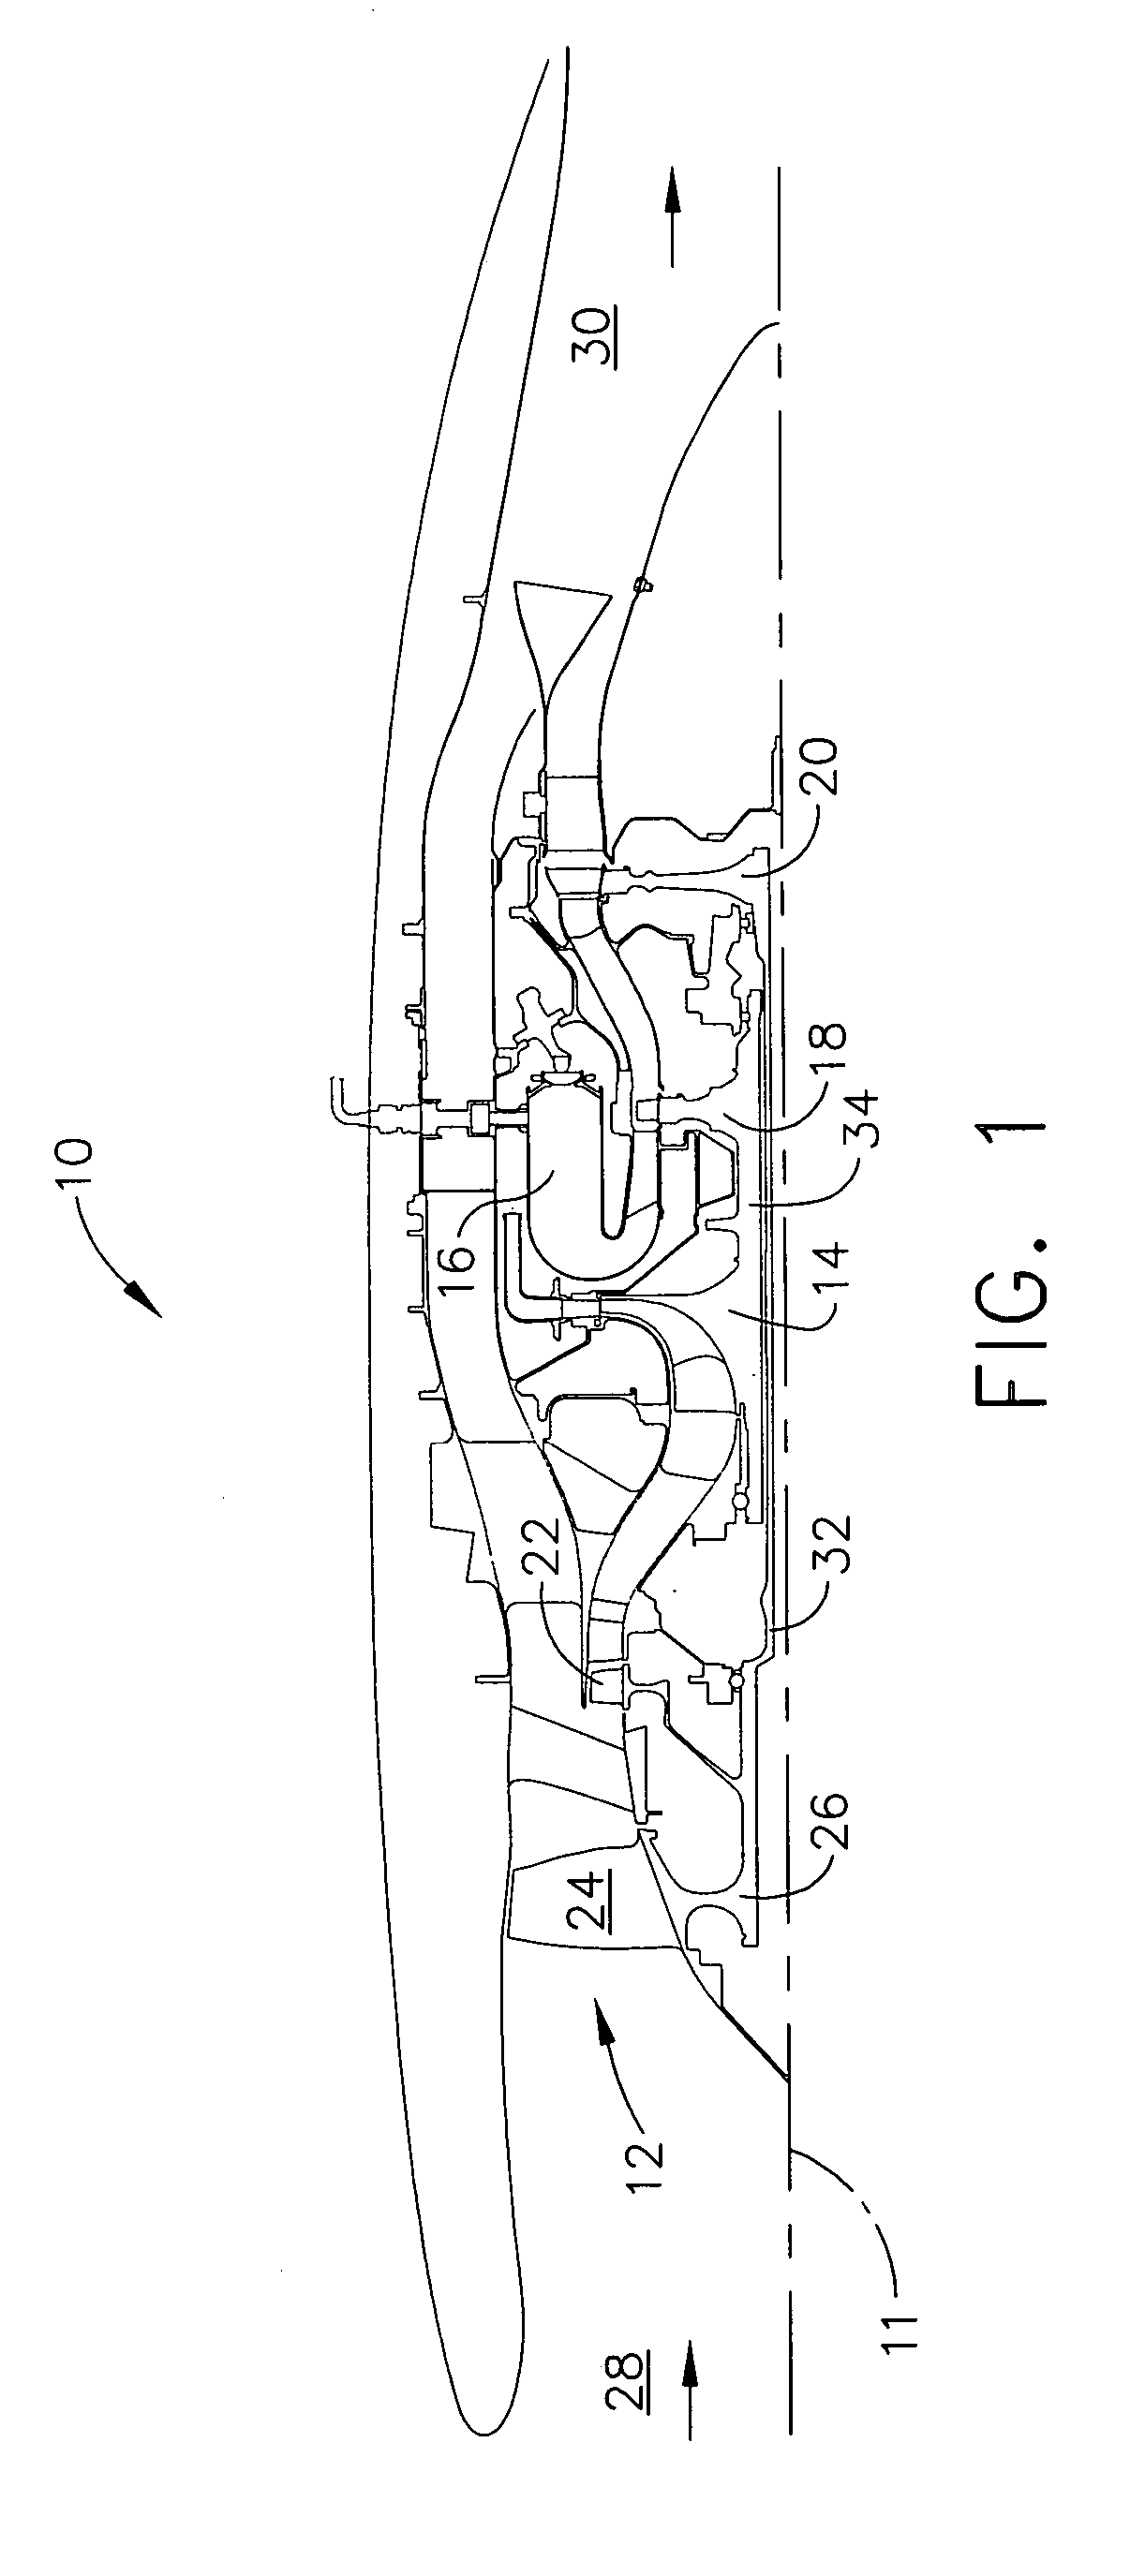 Gas turbine engines seal assembly and methods of assembling the same